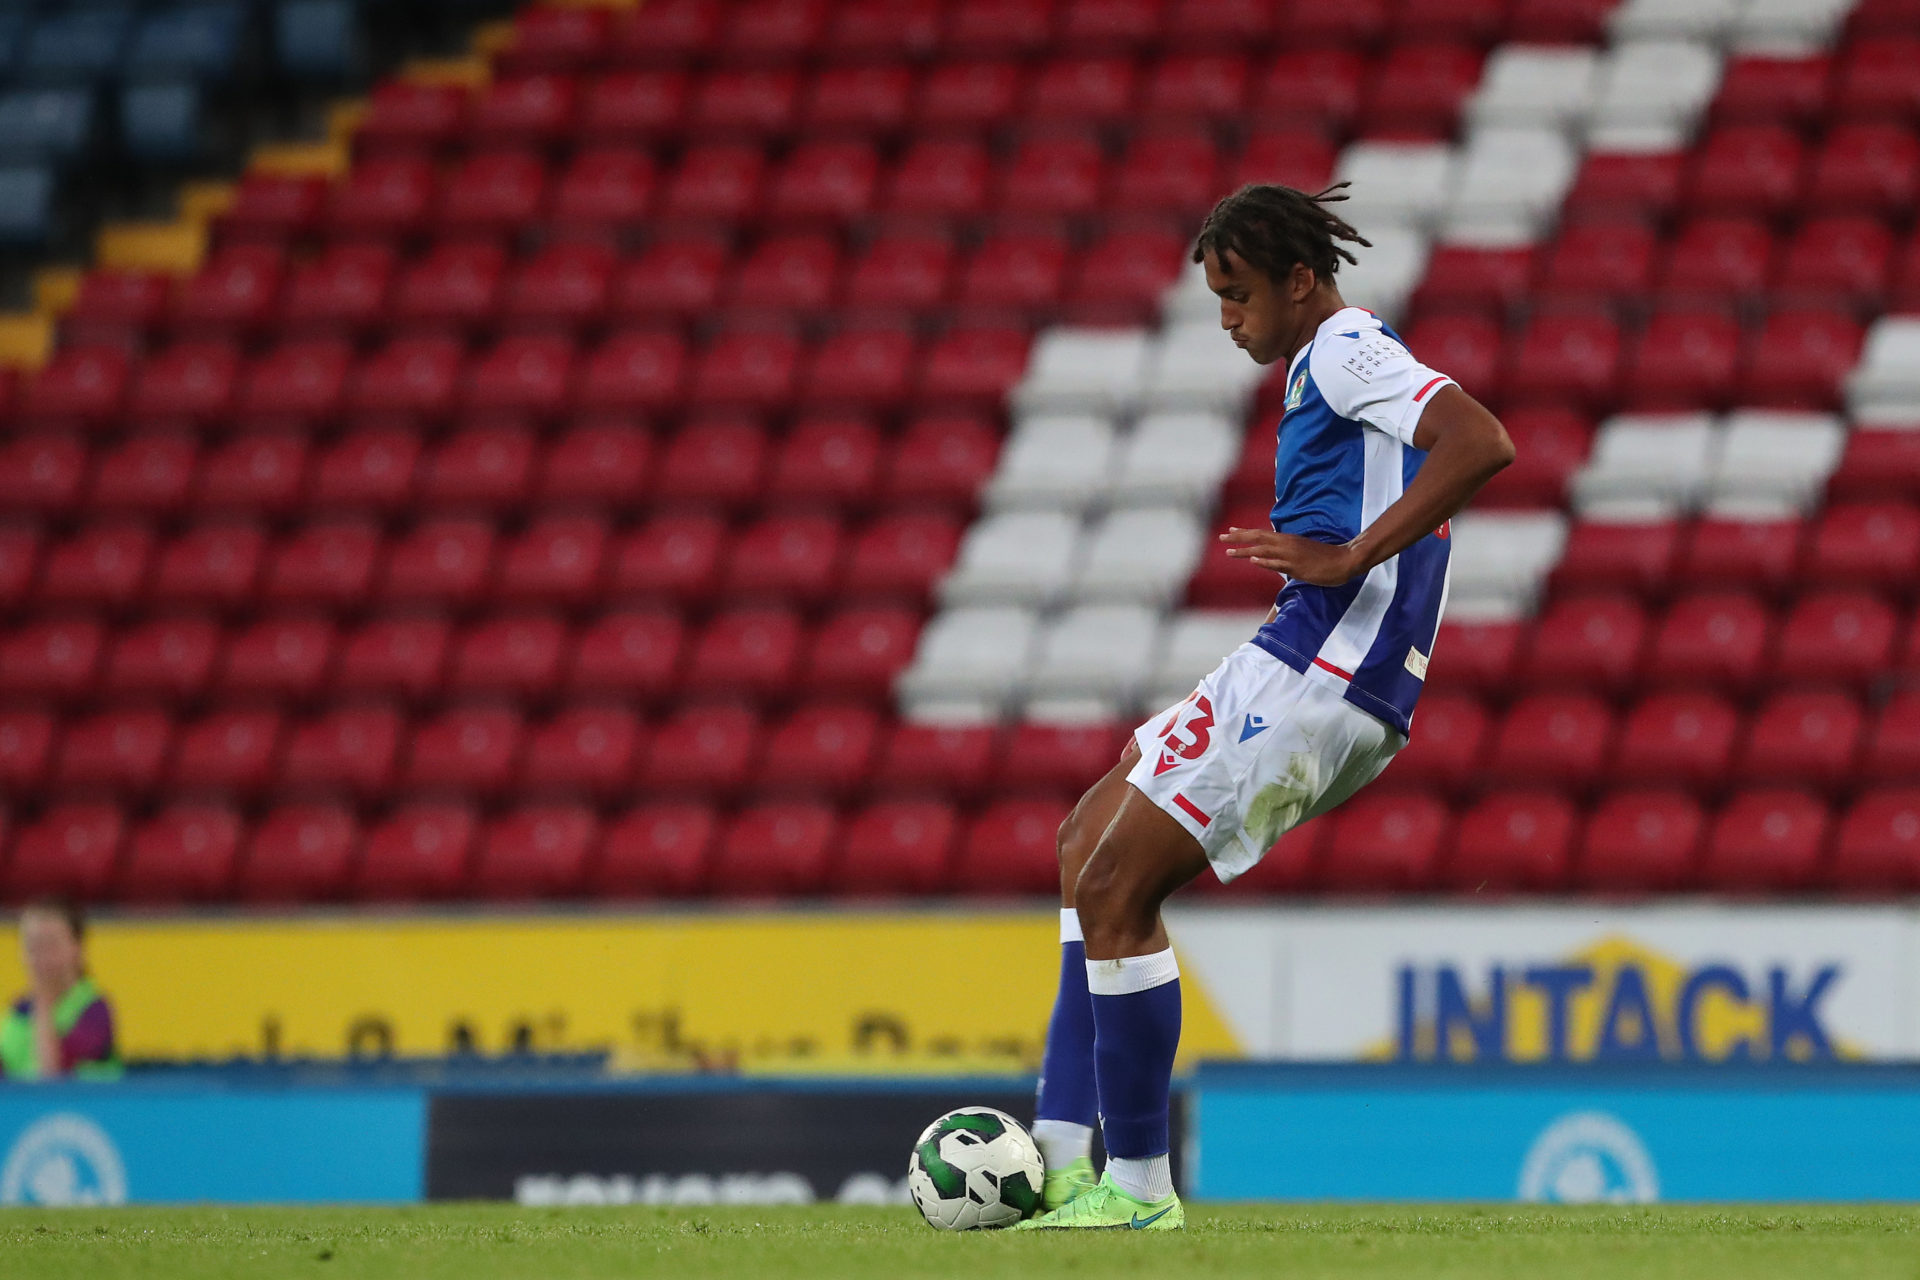 Blackburn Rovers v Hartlepool United - Carabao Cup First Round